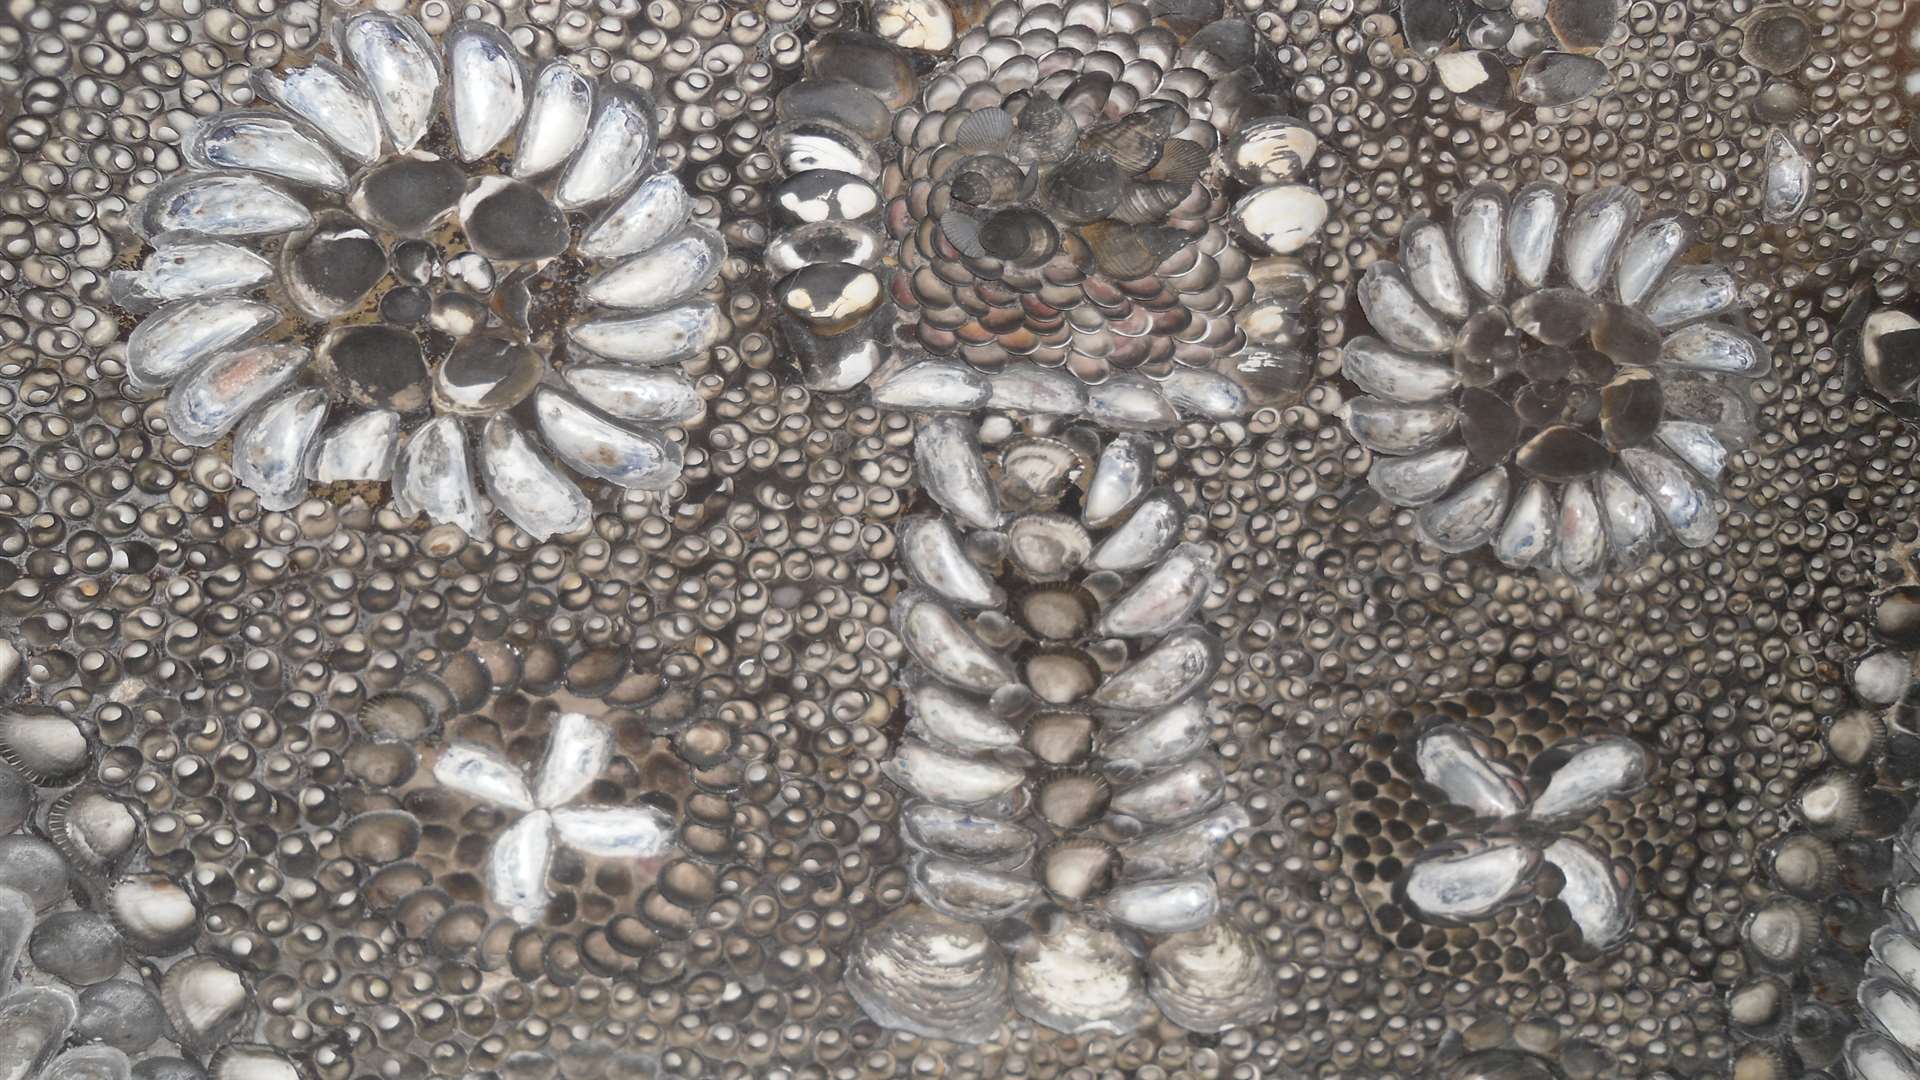 Margate has the beautiful Shell Grotto